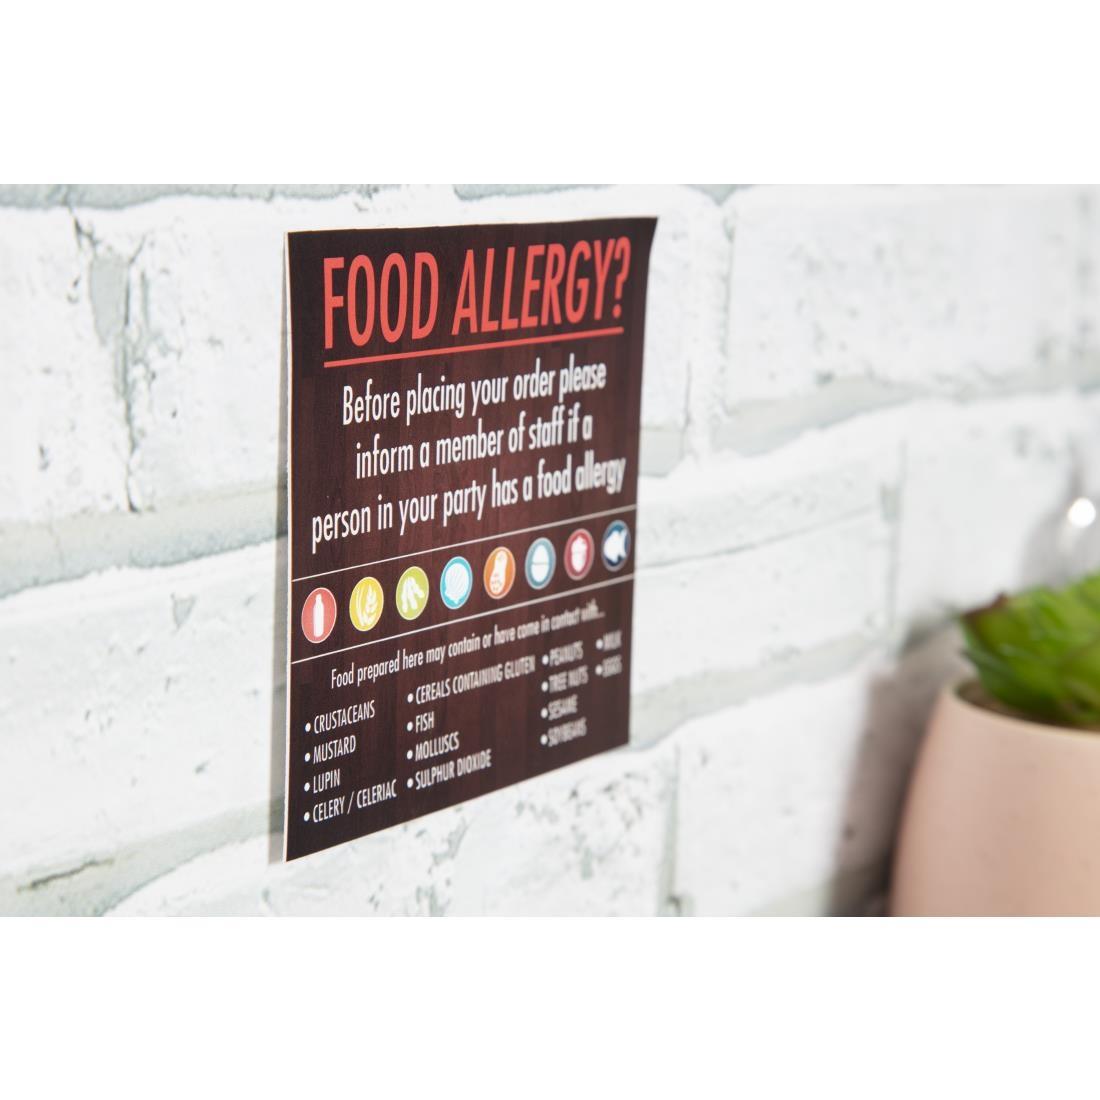 Food Allergen Window and Wall Stickers (Pack of 8) - GM818  - 3